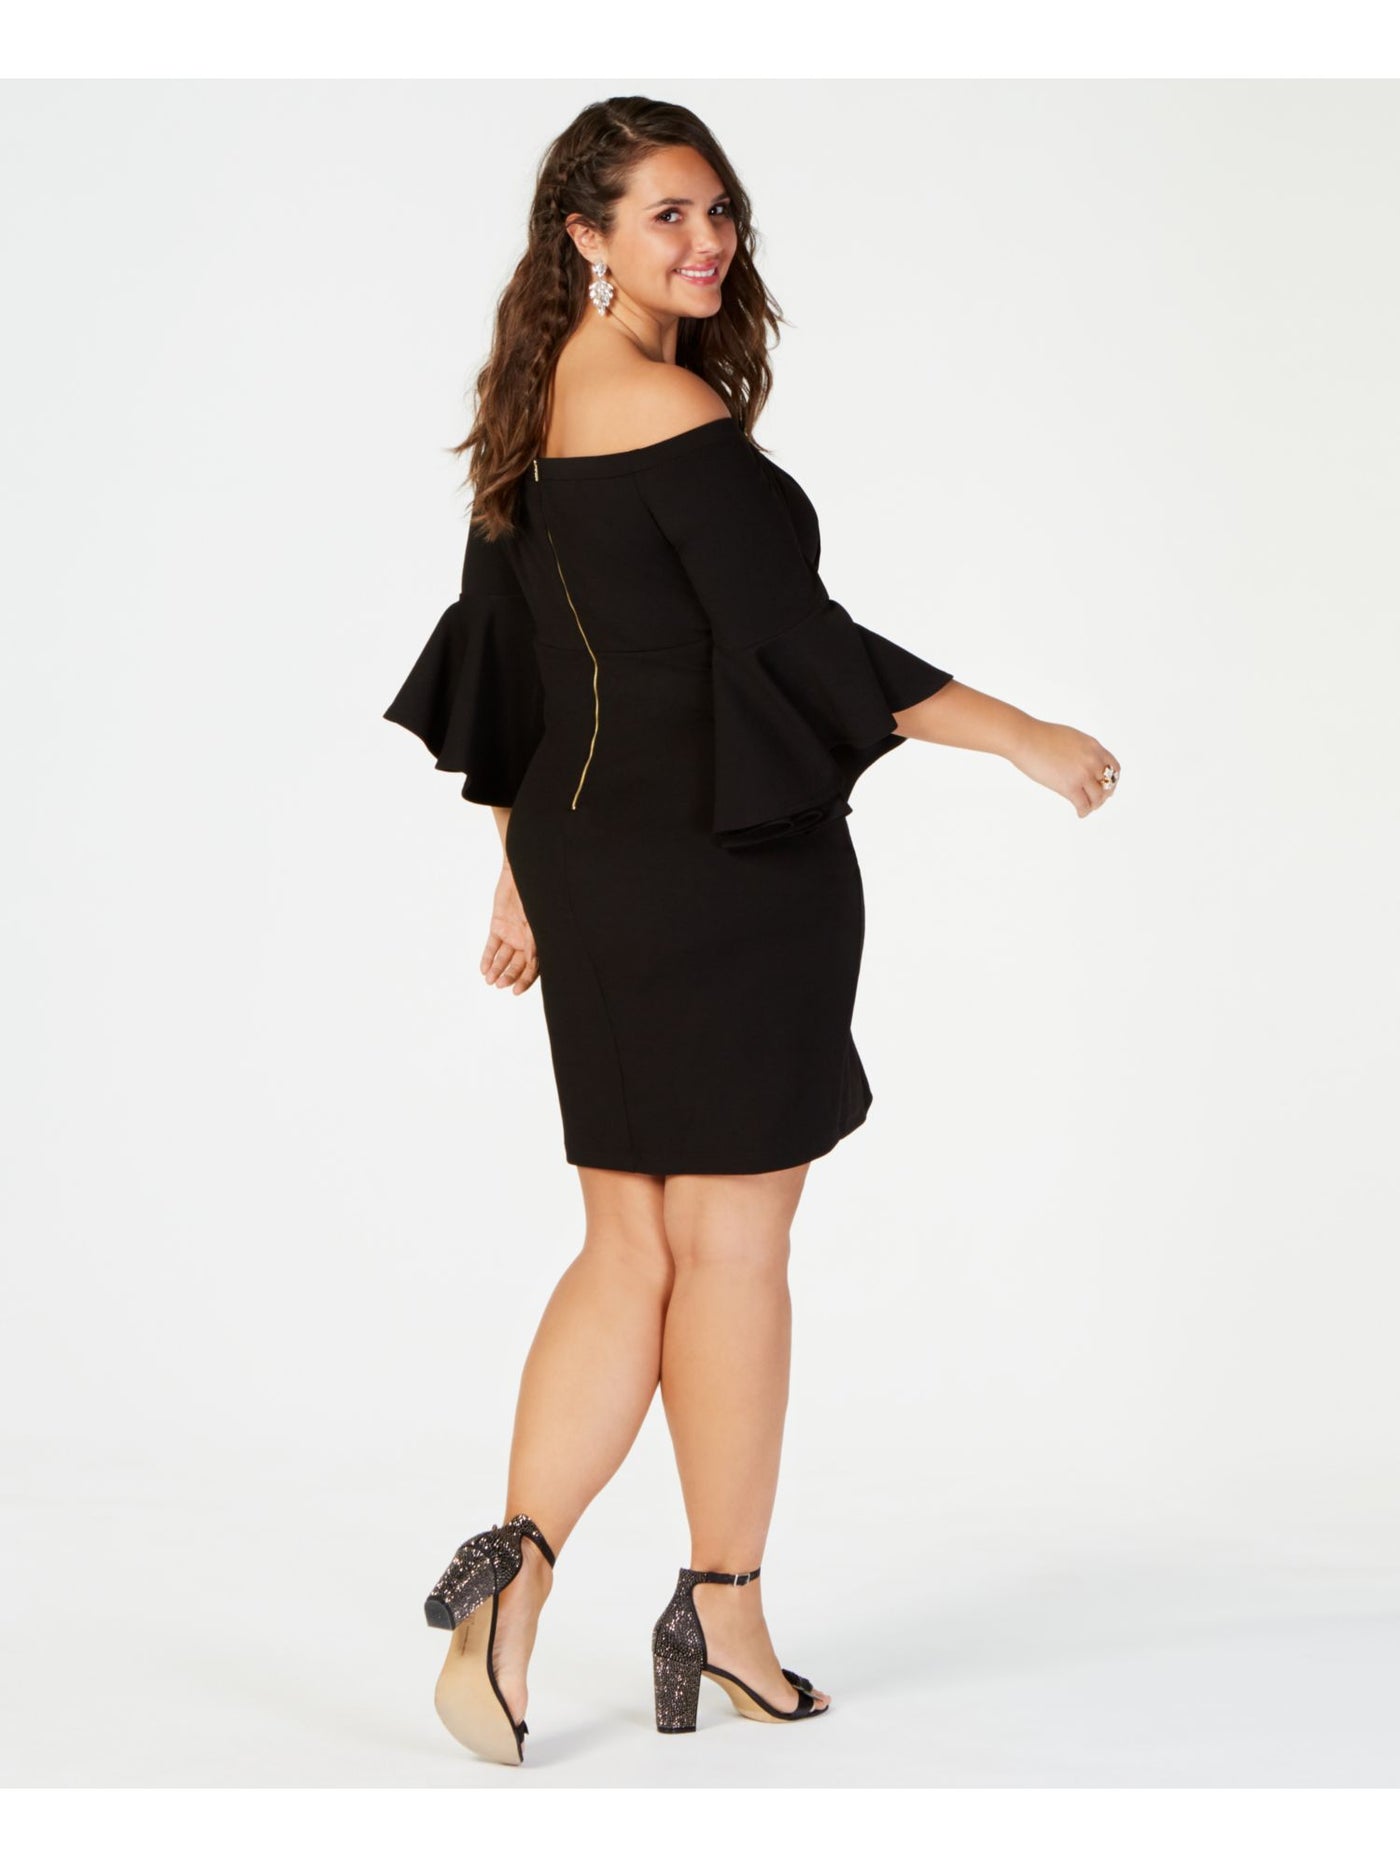 TEEZE ME Womens Black Bell Sleeve Off Shoulder Above The Knee Party Shift Dress Plus 24W